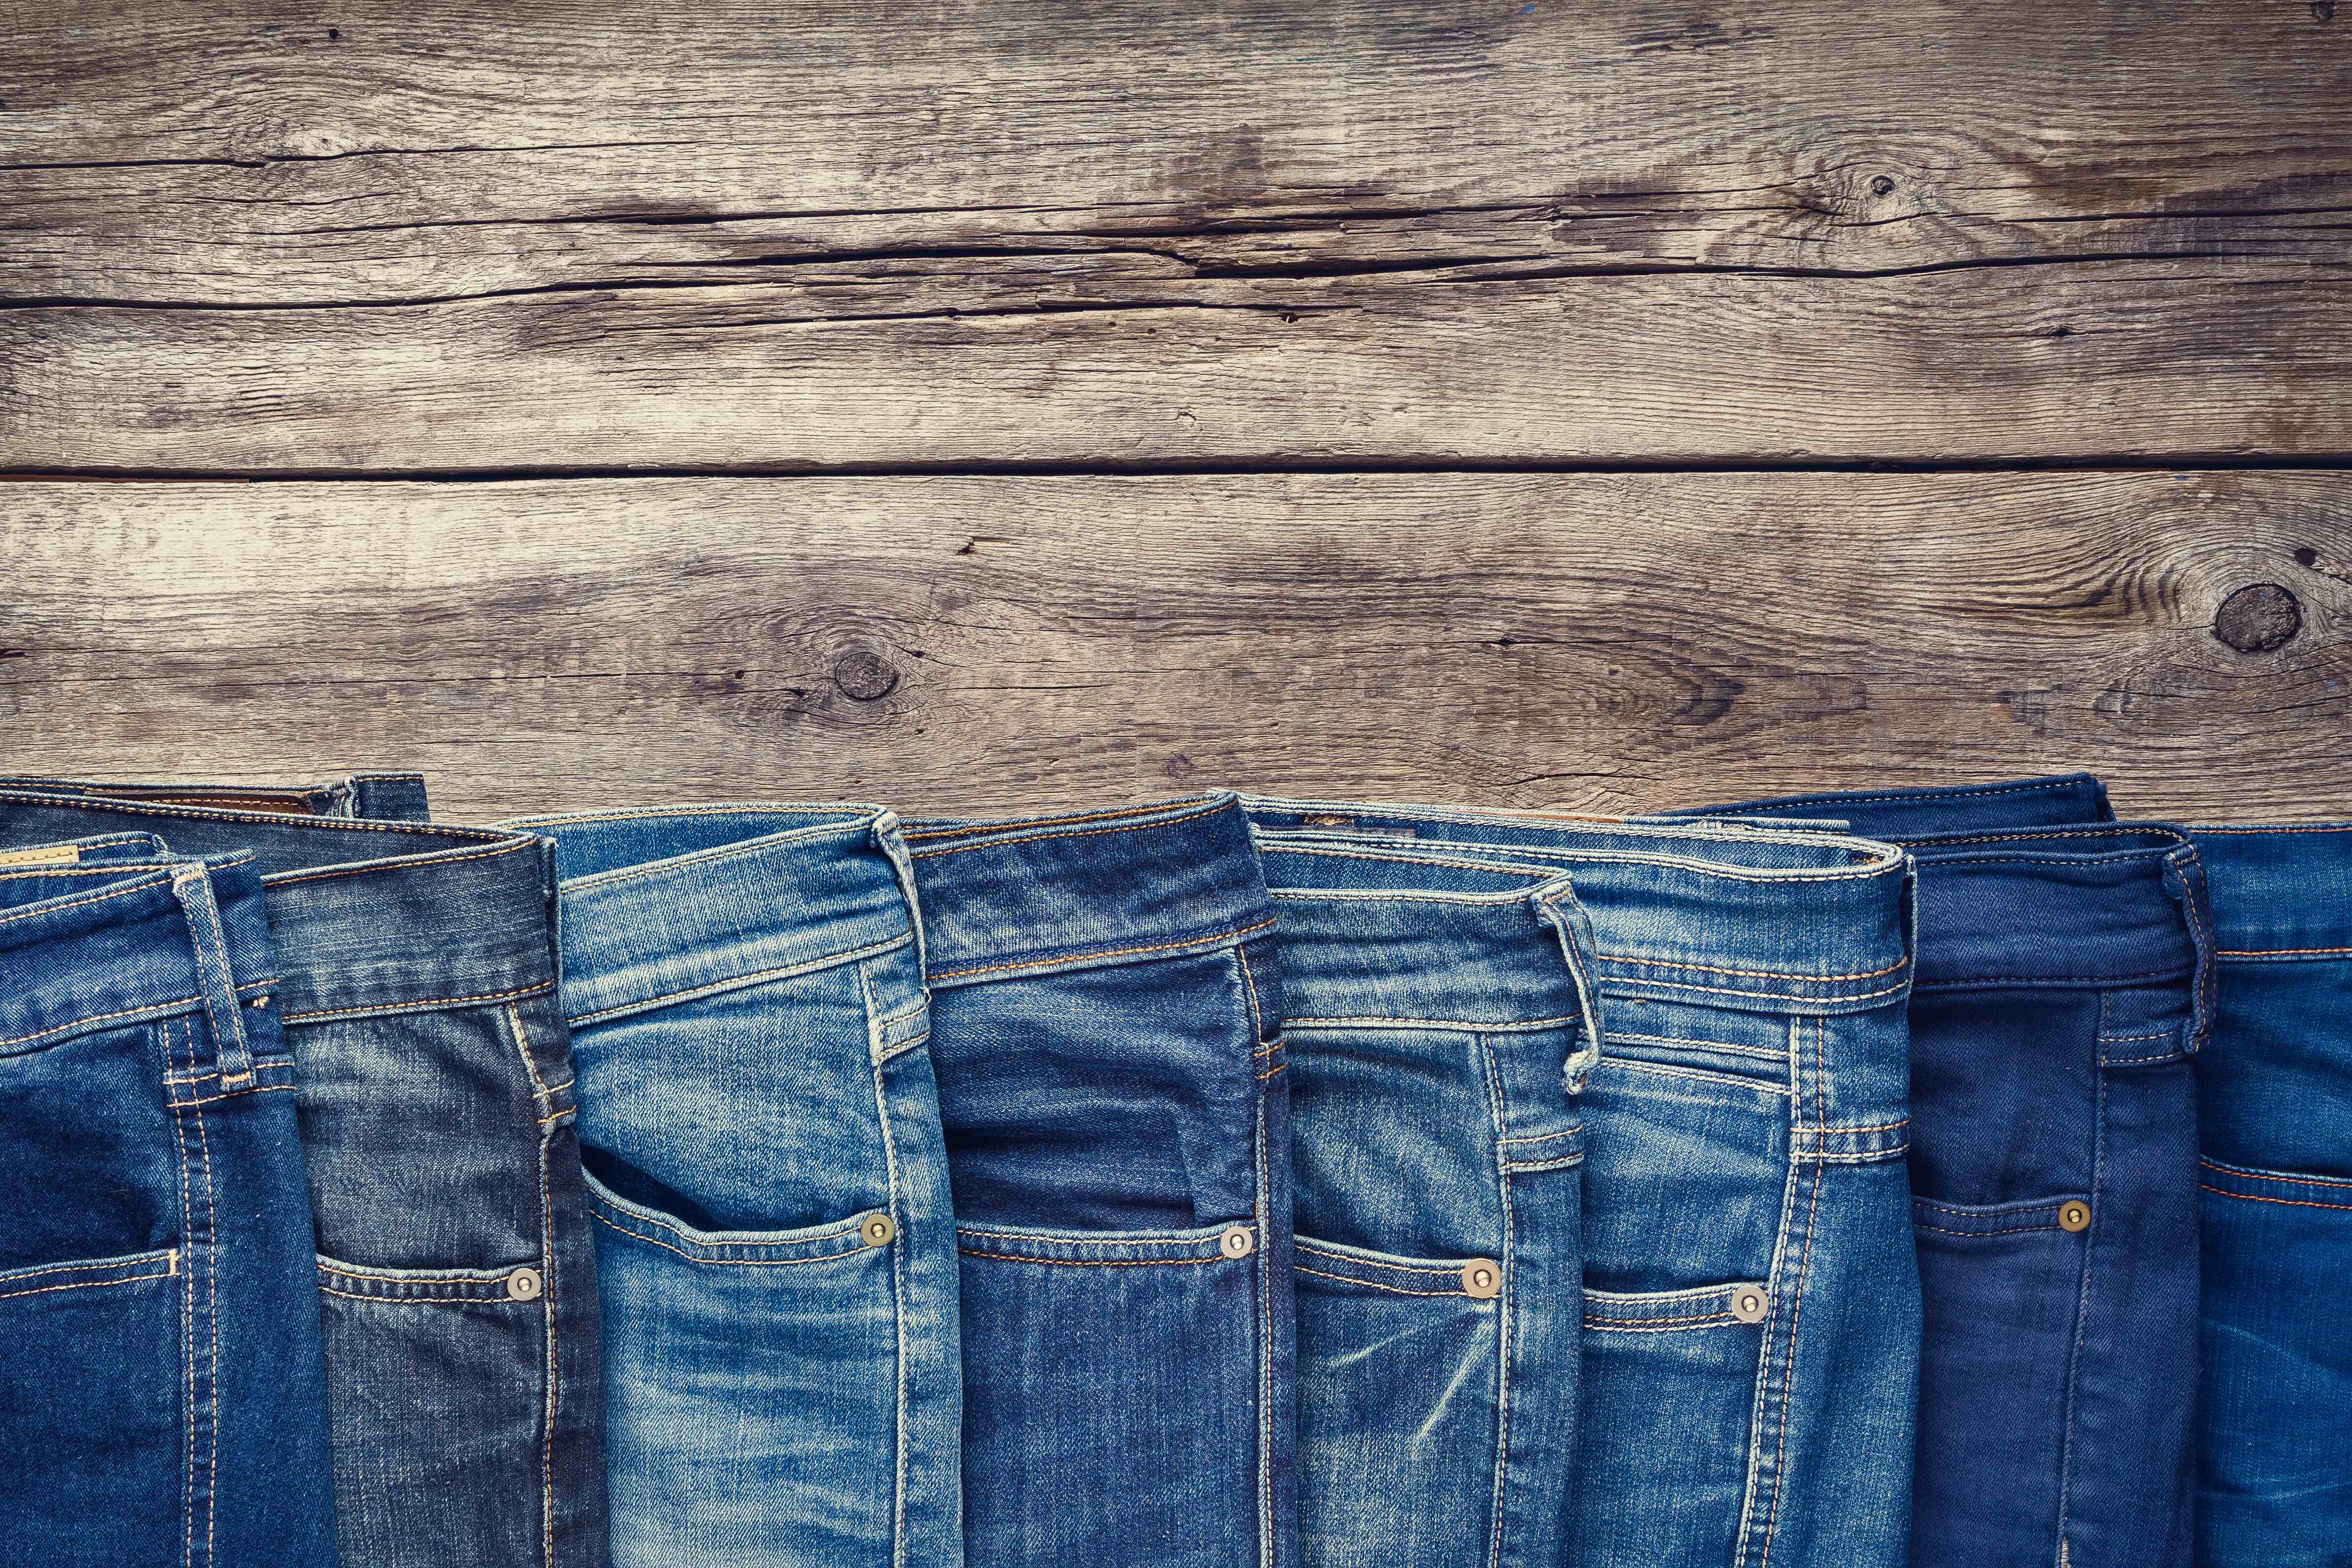 Many different denim jeans on wooden table.jpg